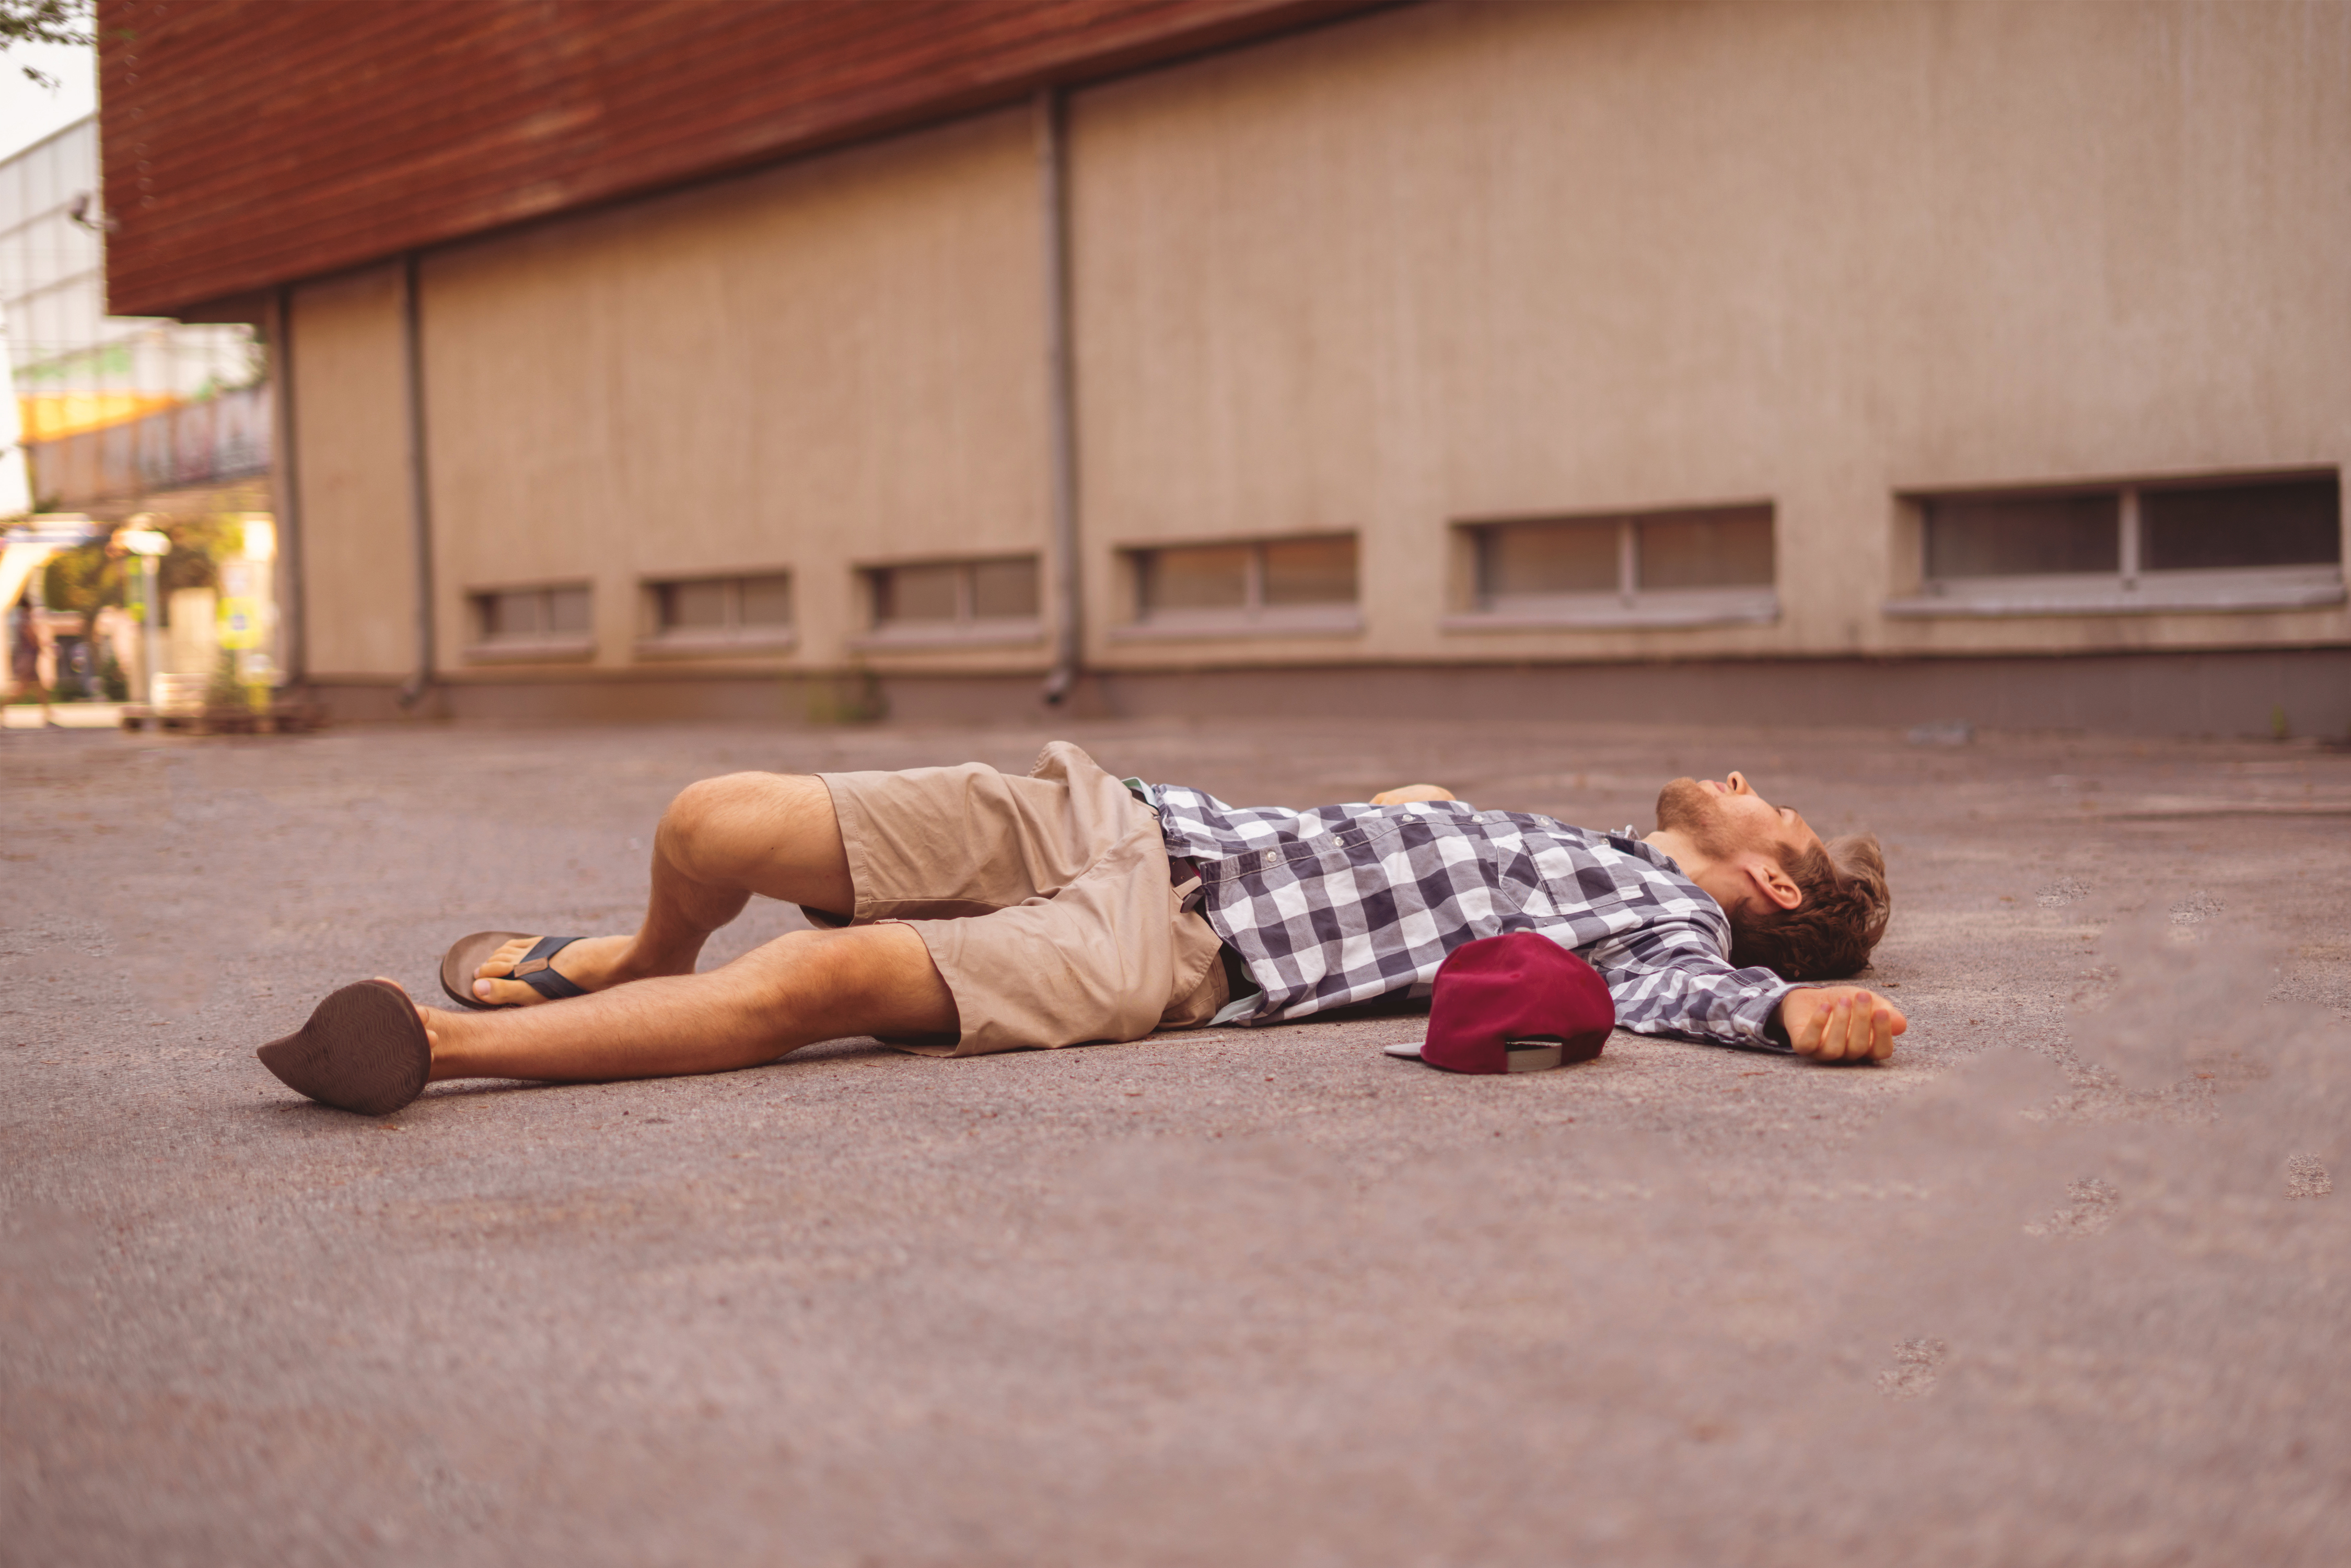 Man on the ground | Source: Shutterstock.com